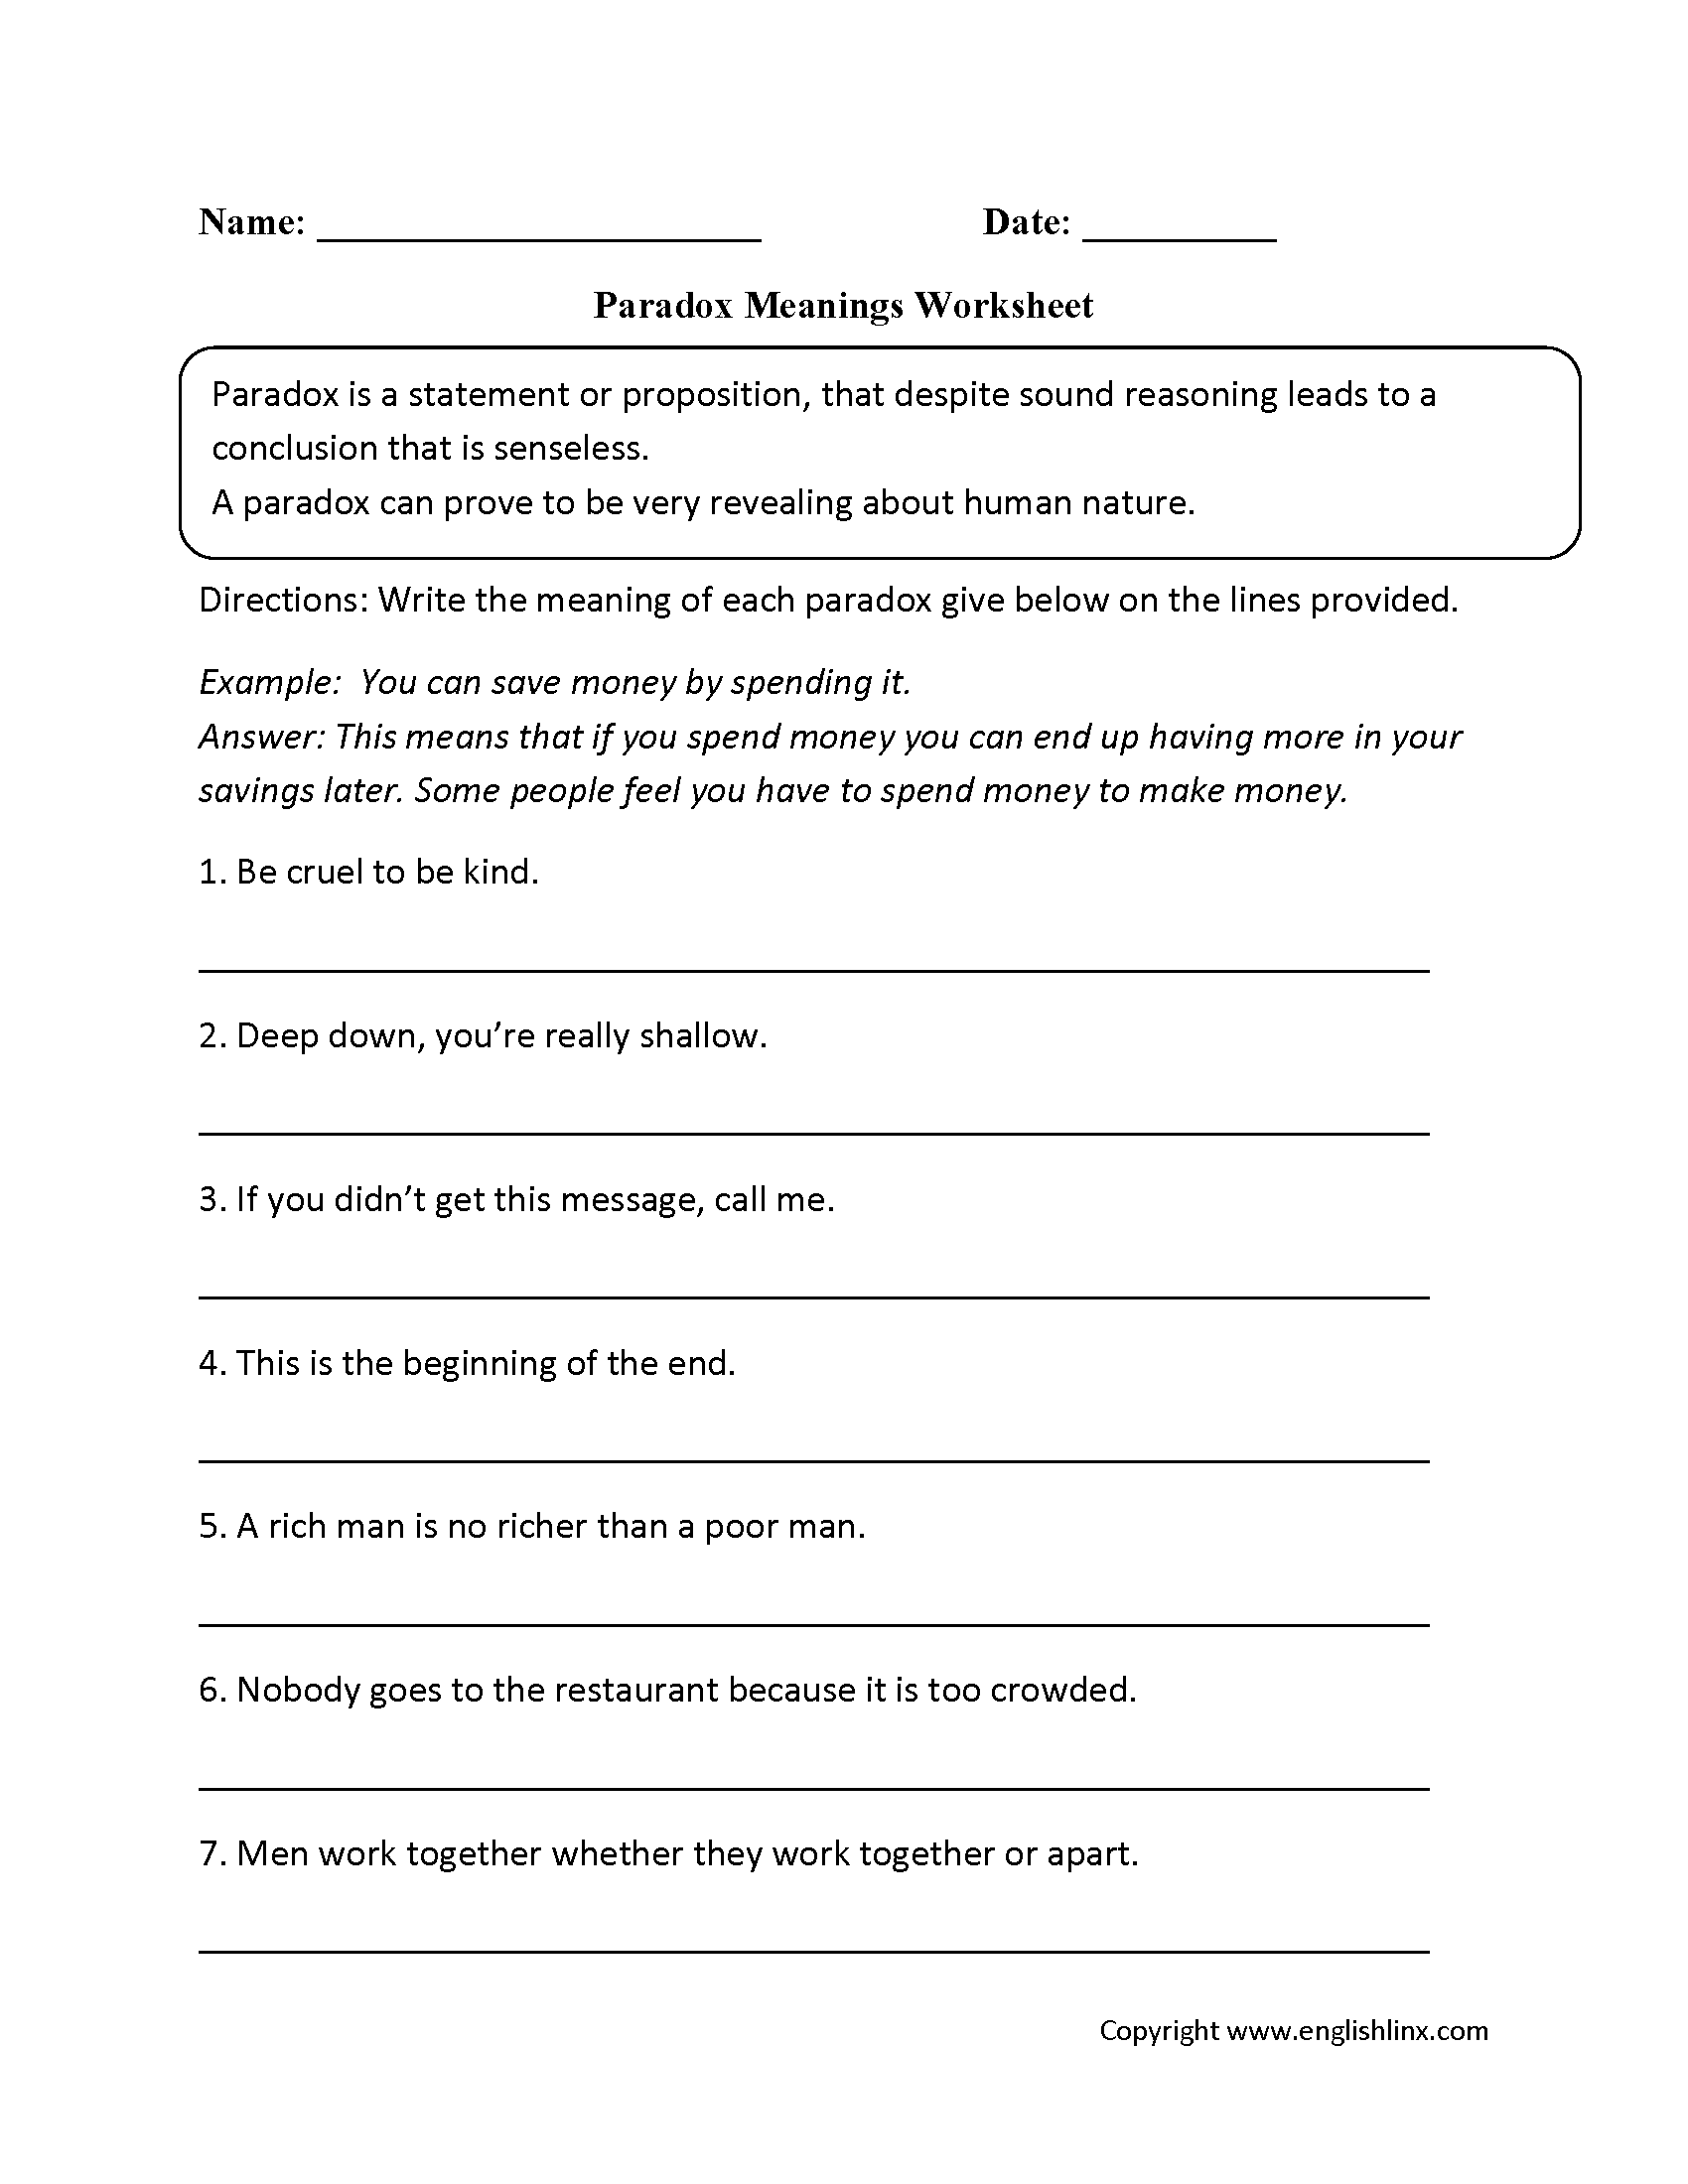 Paradox Meaning Worksheets